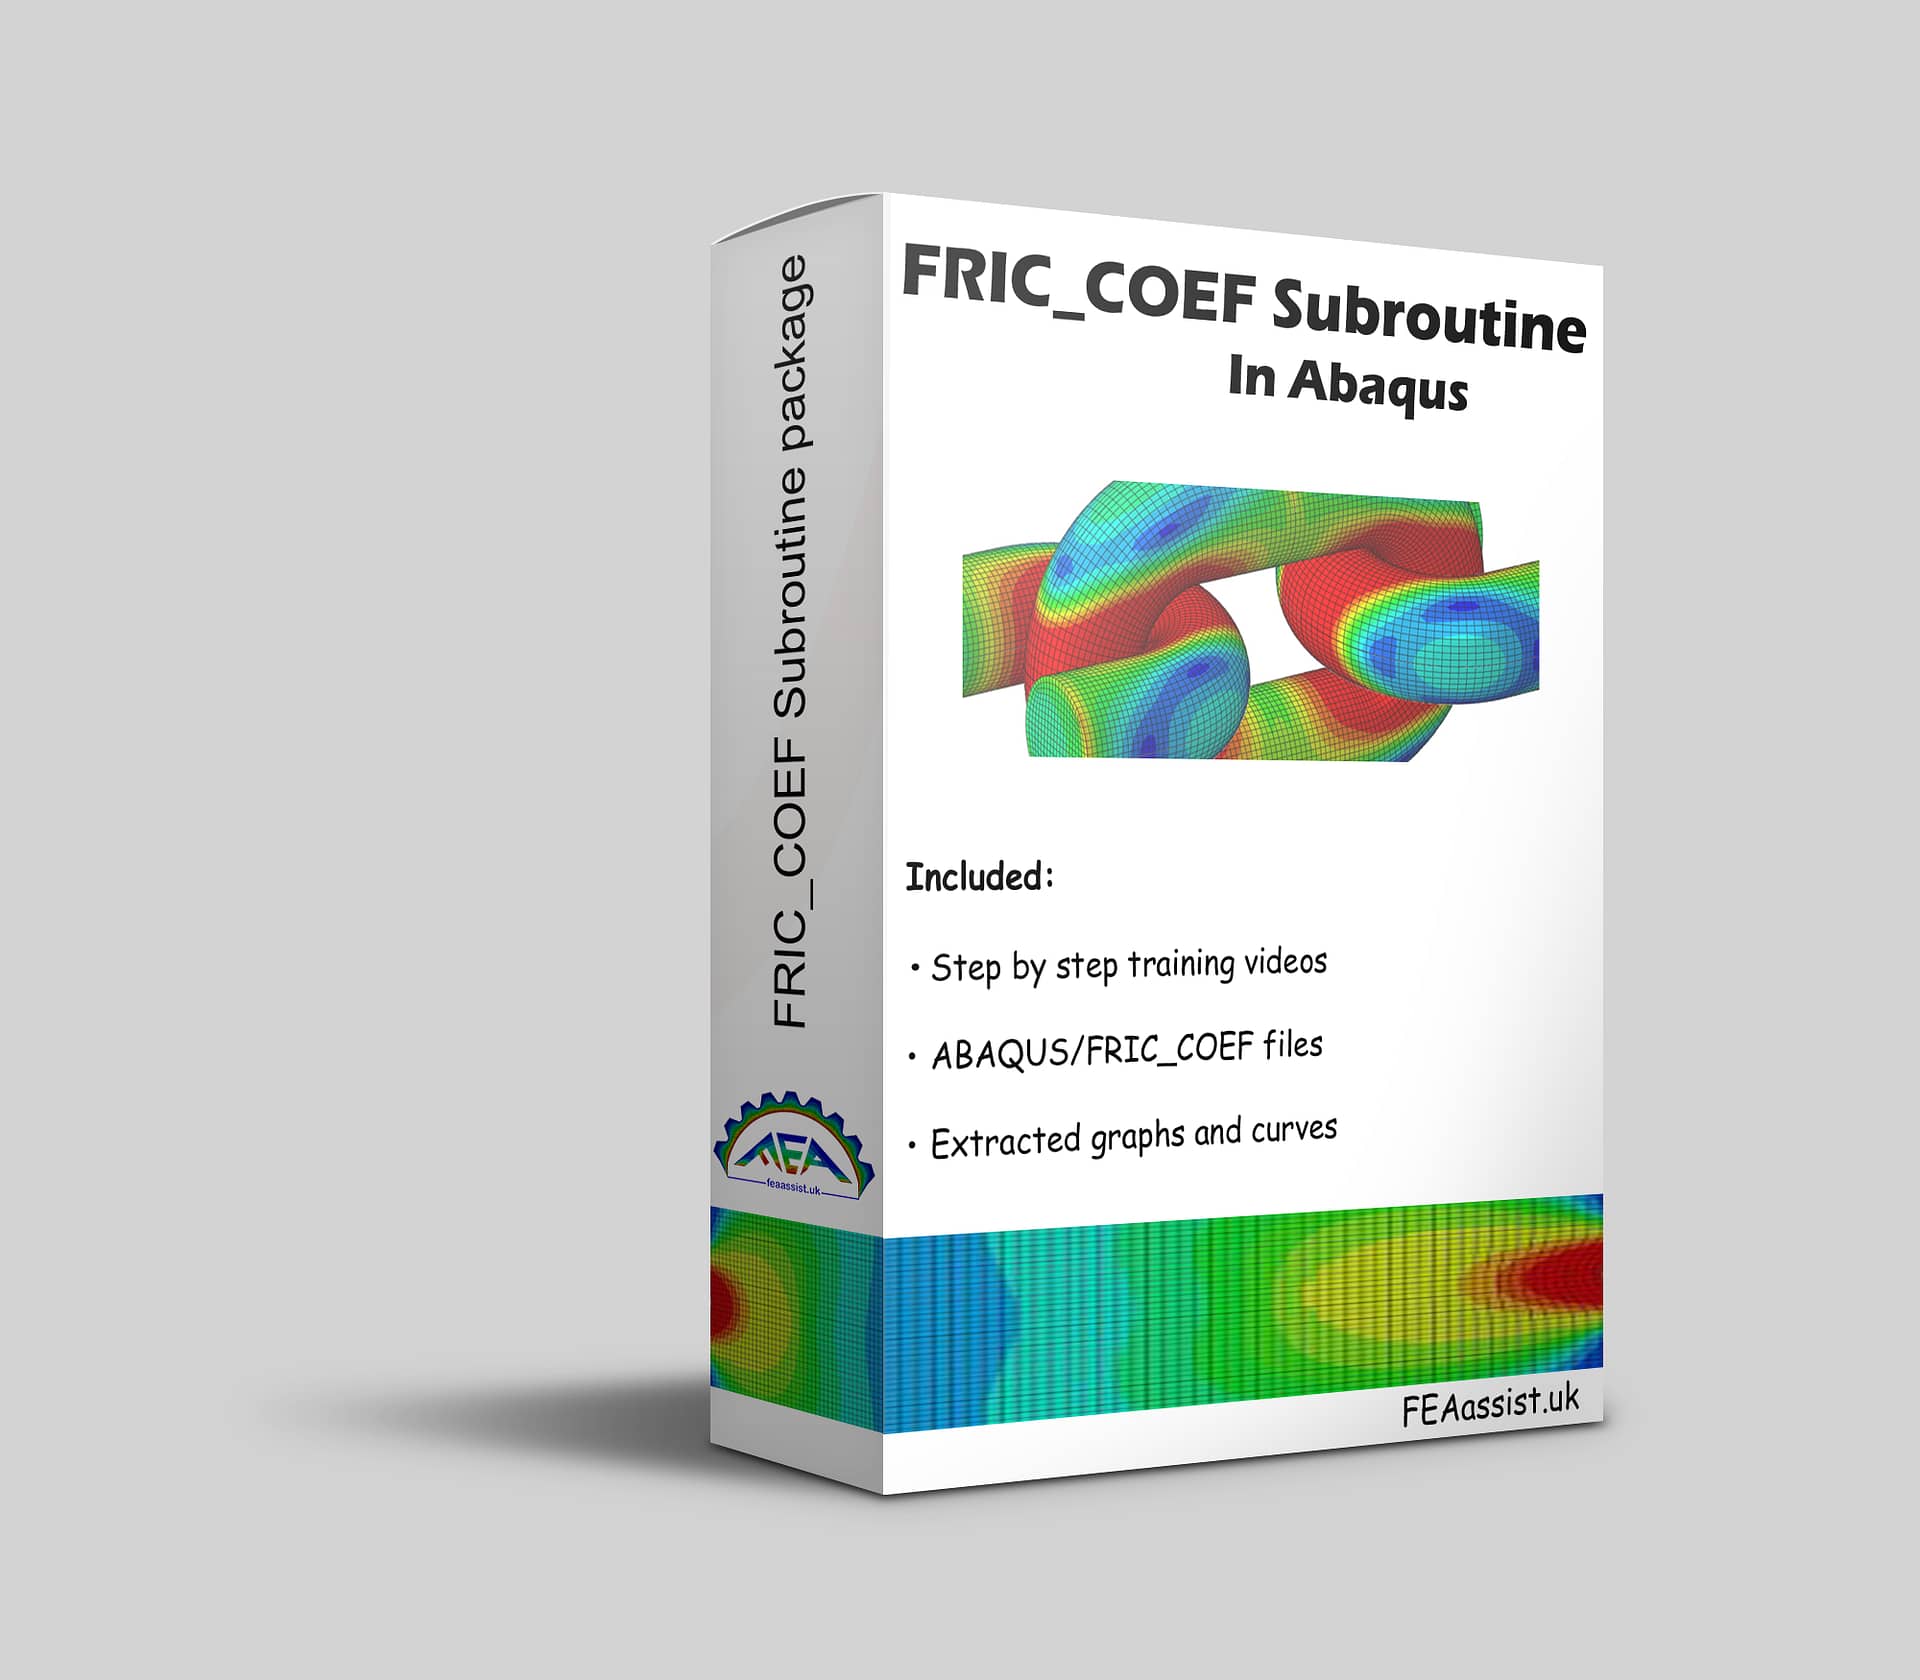 FRIC_COEF subroutine tutorial